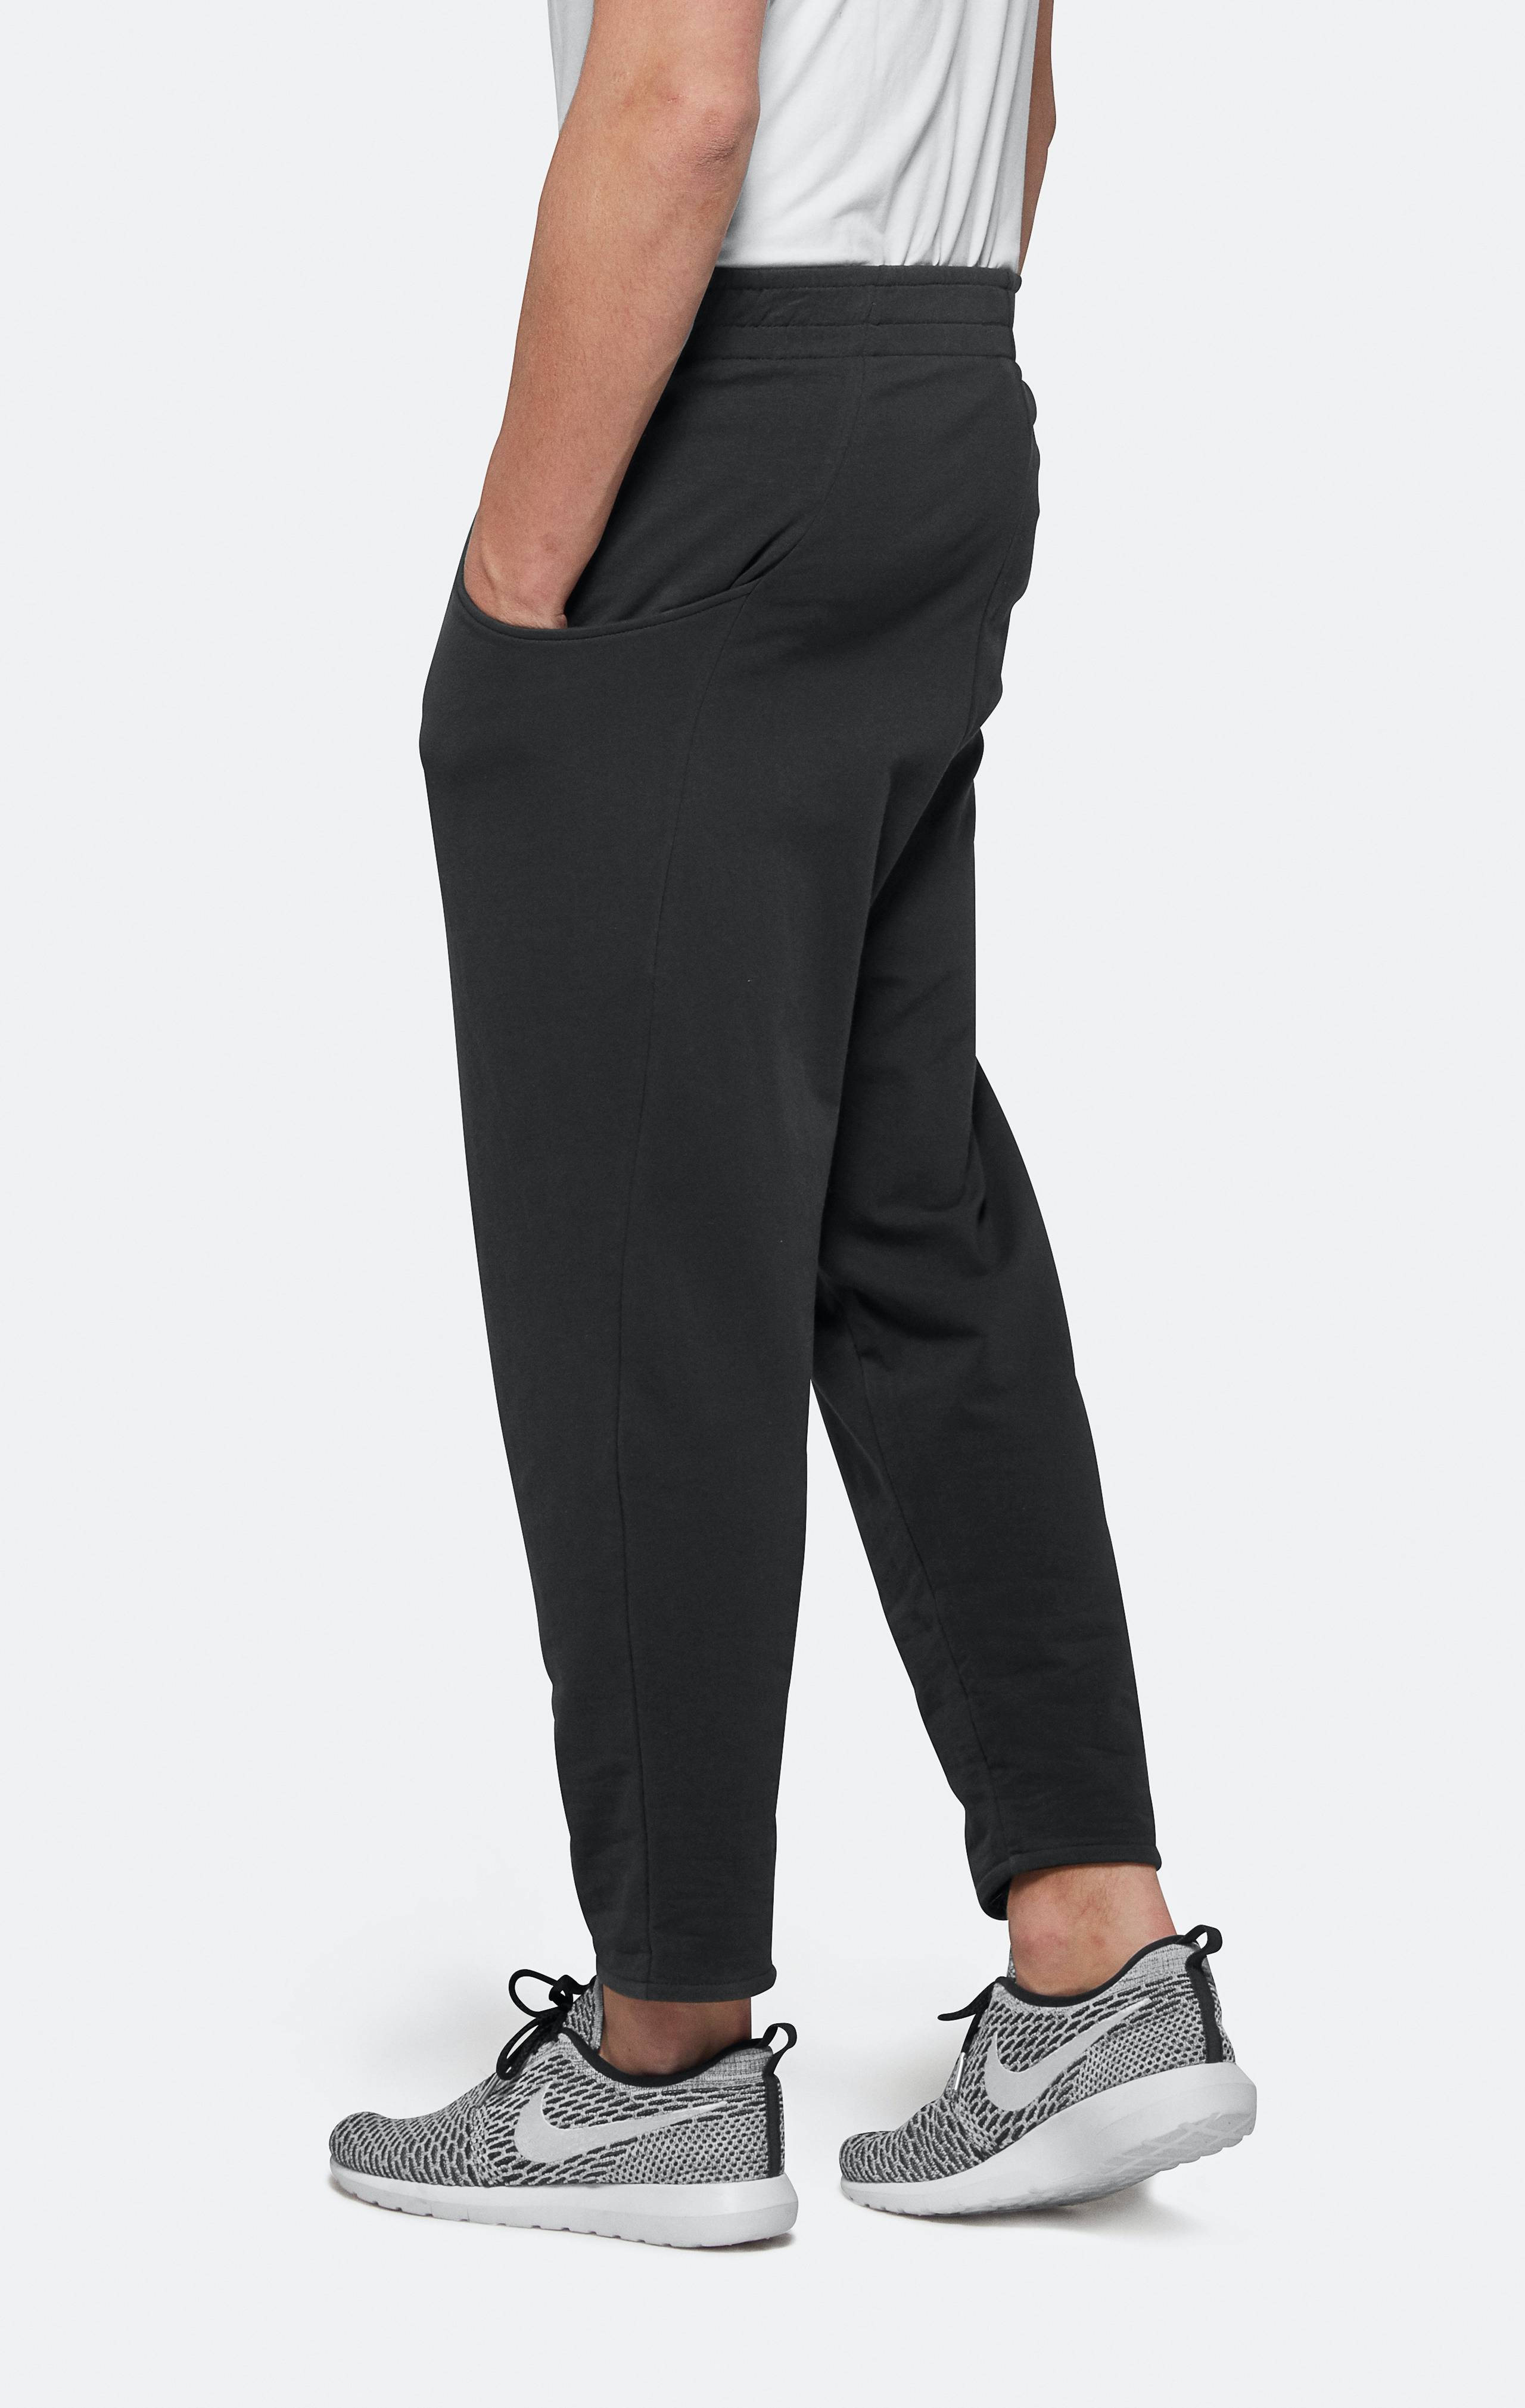 Onepiece Tag Pant CHARCOAL - 4